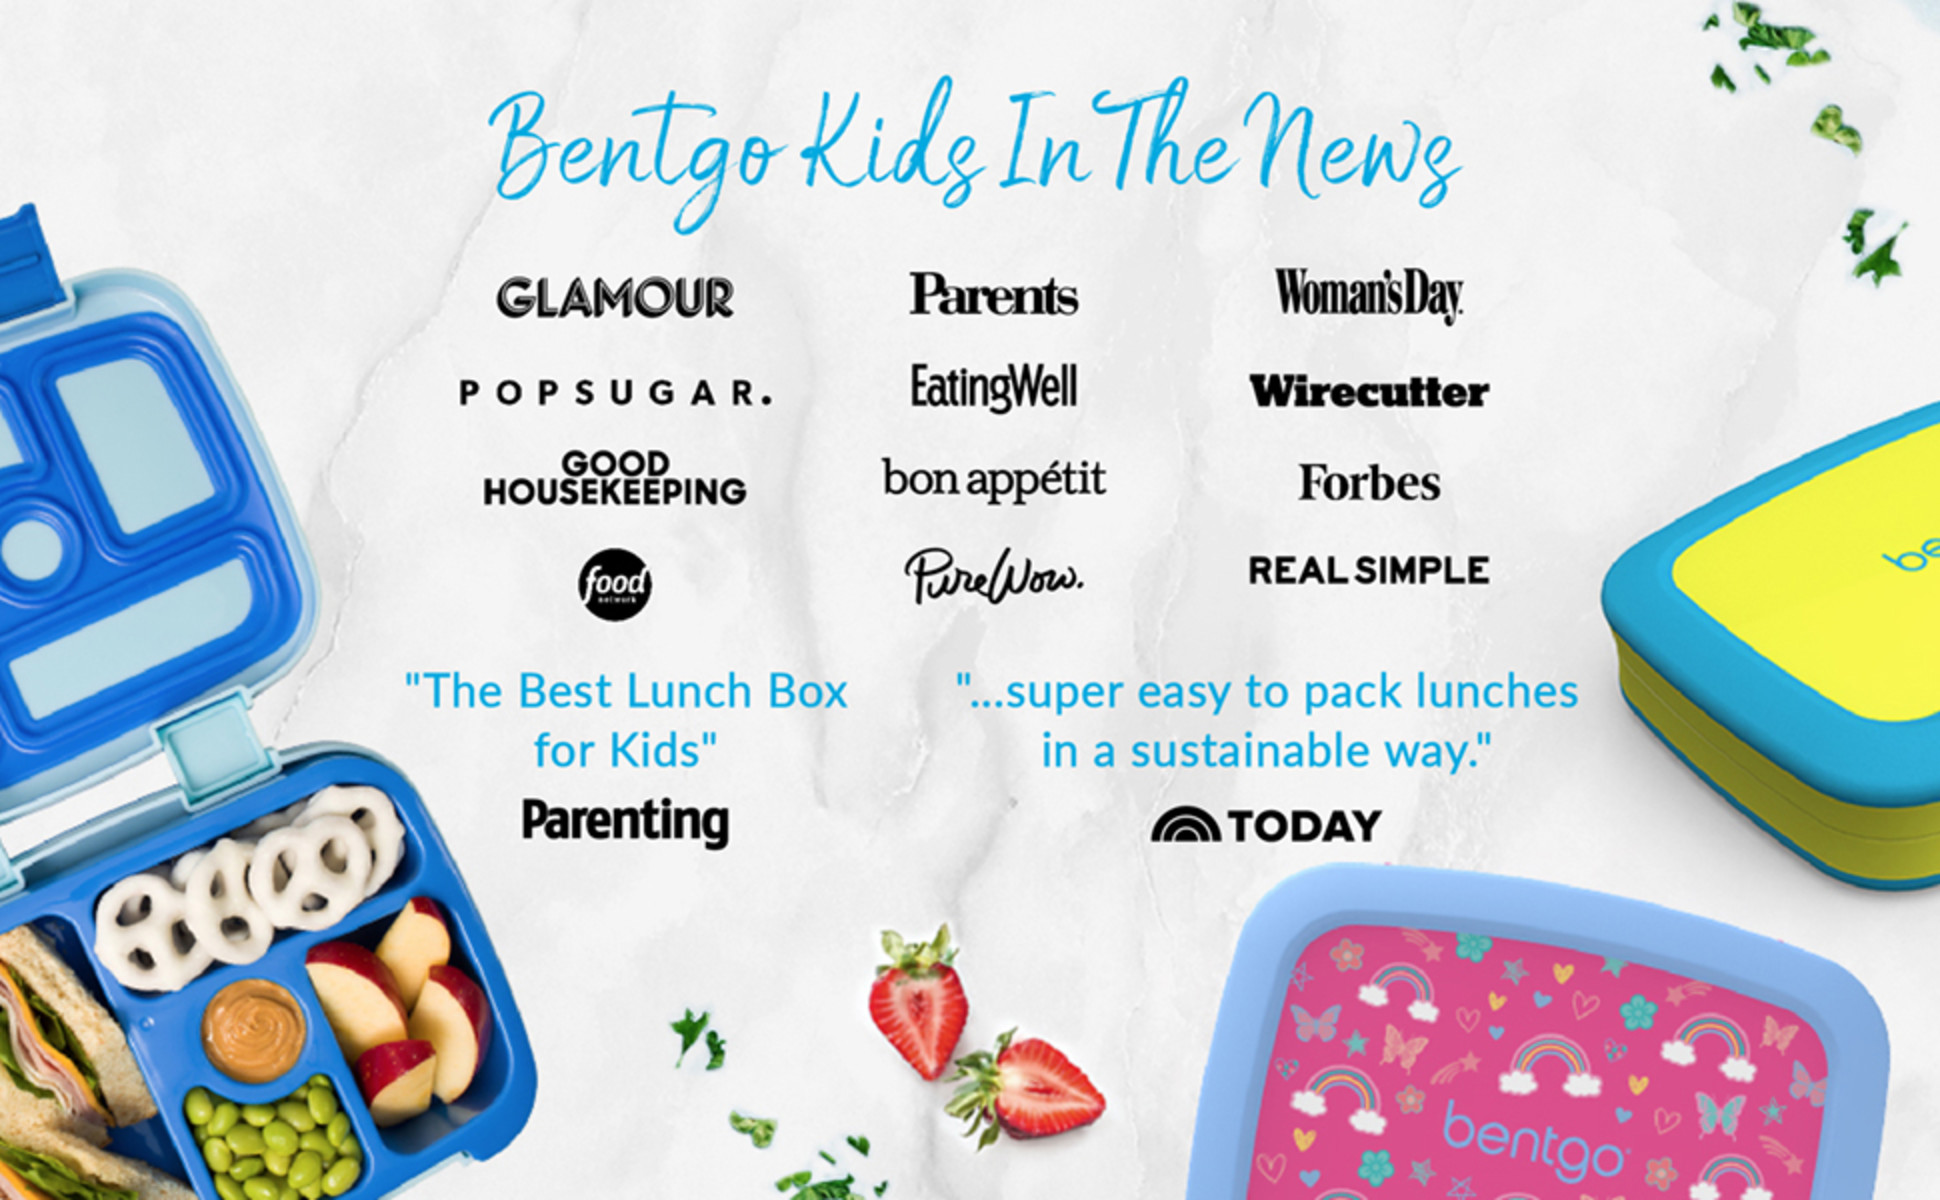  Bentgo® Kids Prints Leak-Proof, 5-Compartment Bento-Style Kids  Lunch Box - Ideal Portion Sizes for Ages 3 to 7 - BPA-Free, Dishwasher  Safe, Food-Safe Materials, 2-Year Warranty (Rocket) : Home & Kitchen